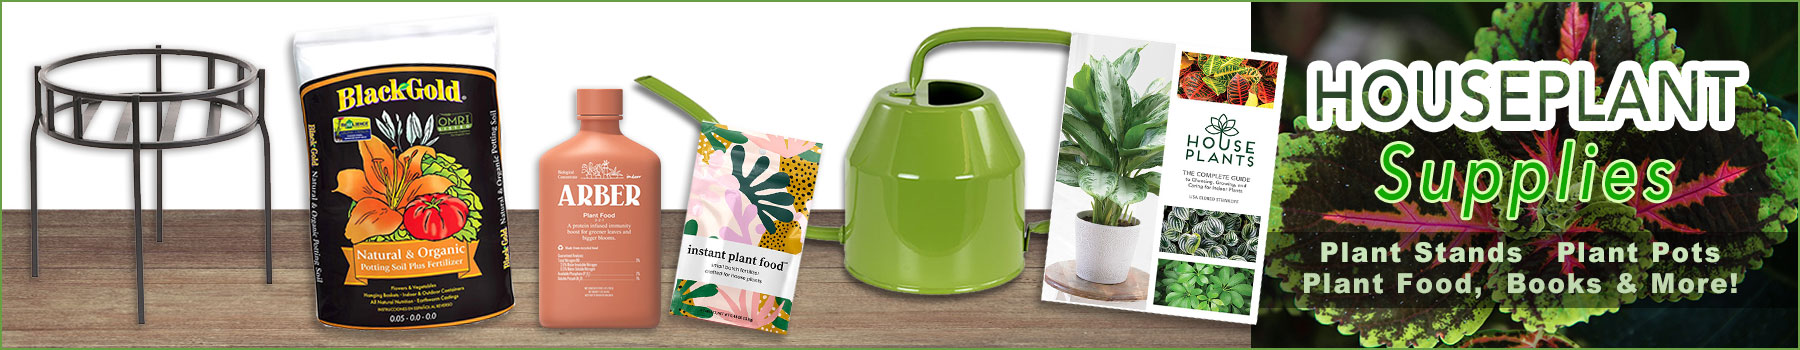 Houseplant Supplies -Shop Our New Collection of plant pots!